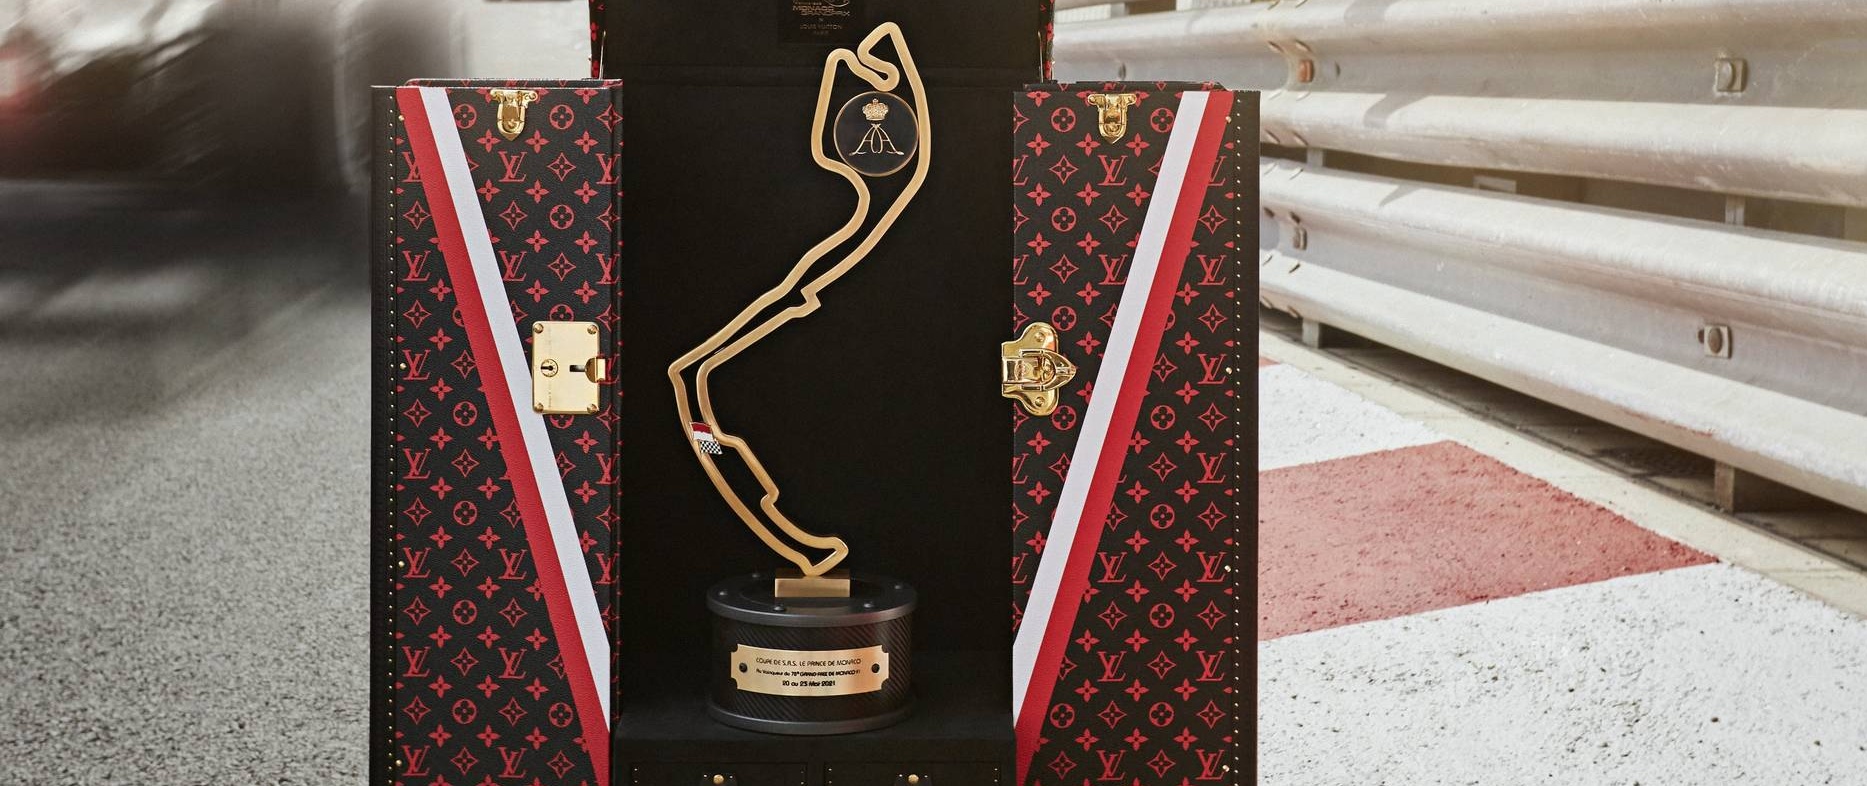 Louis Vuitton Has Created a Bespoke Case for This Year's Monaco Grand Prix  Trophy